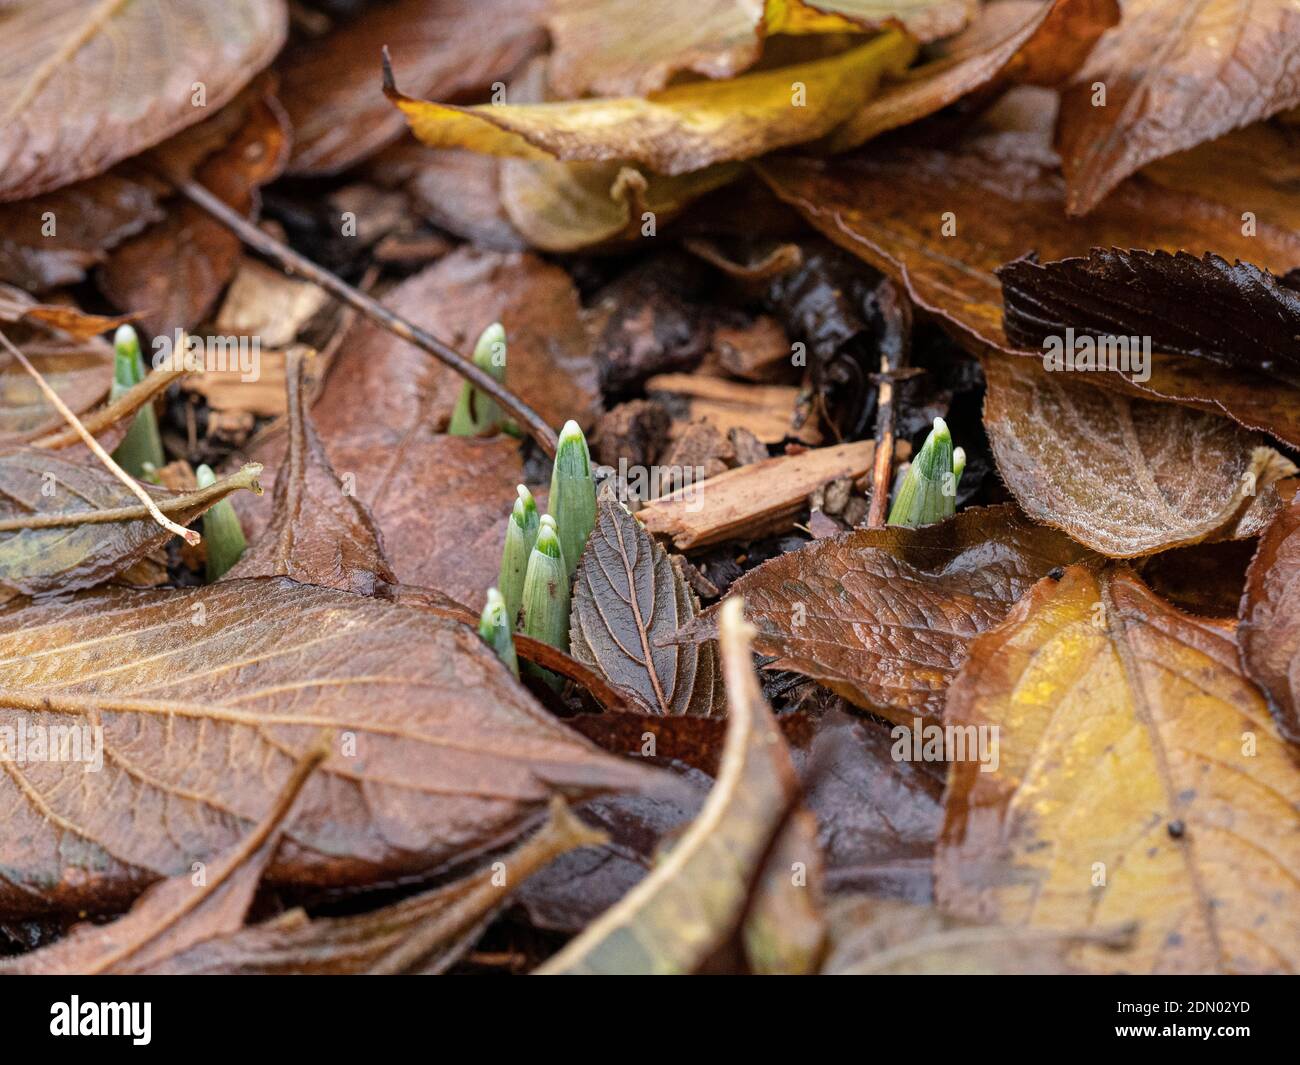 Snowdrops beginning to emerge from a covering of brown winter leaves Stock Photo